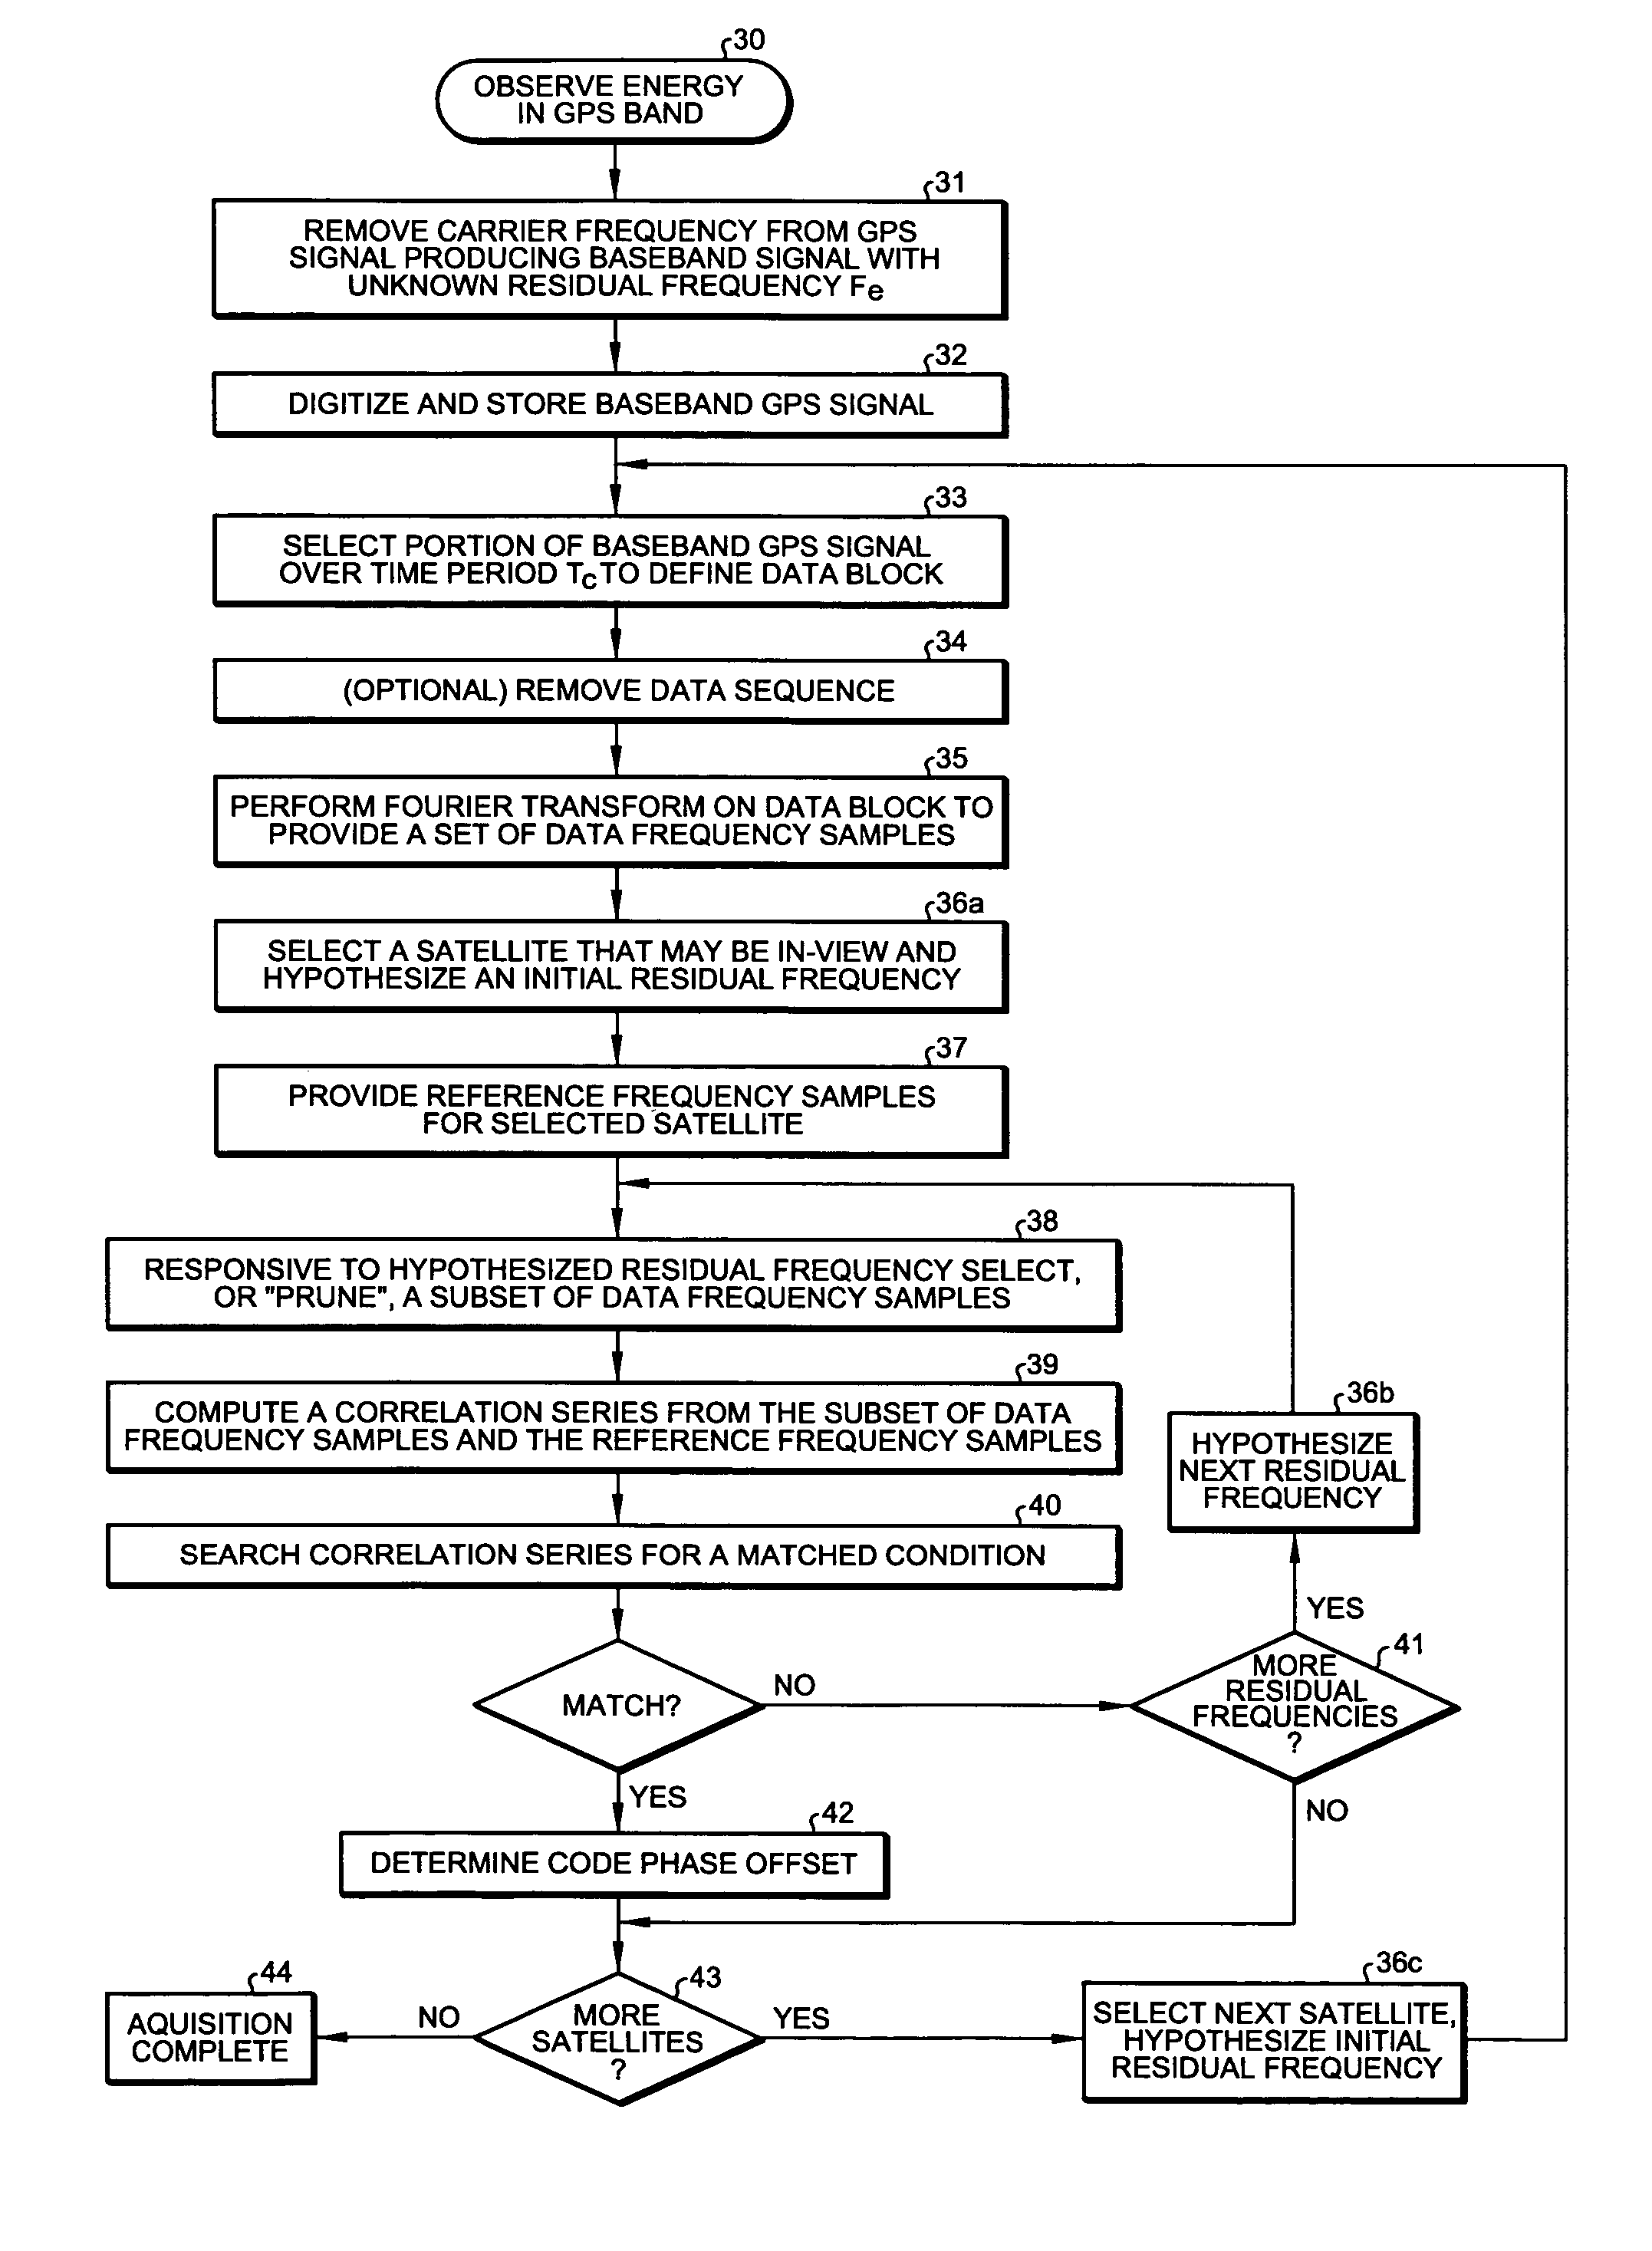 Rapid acquisition methods and apparatus for GPS signals